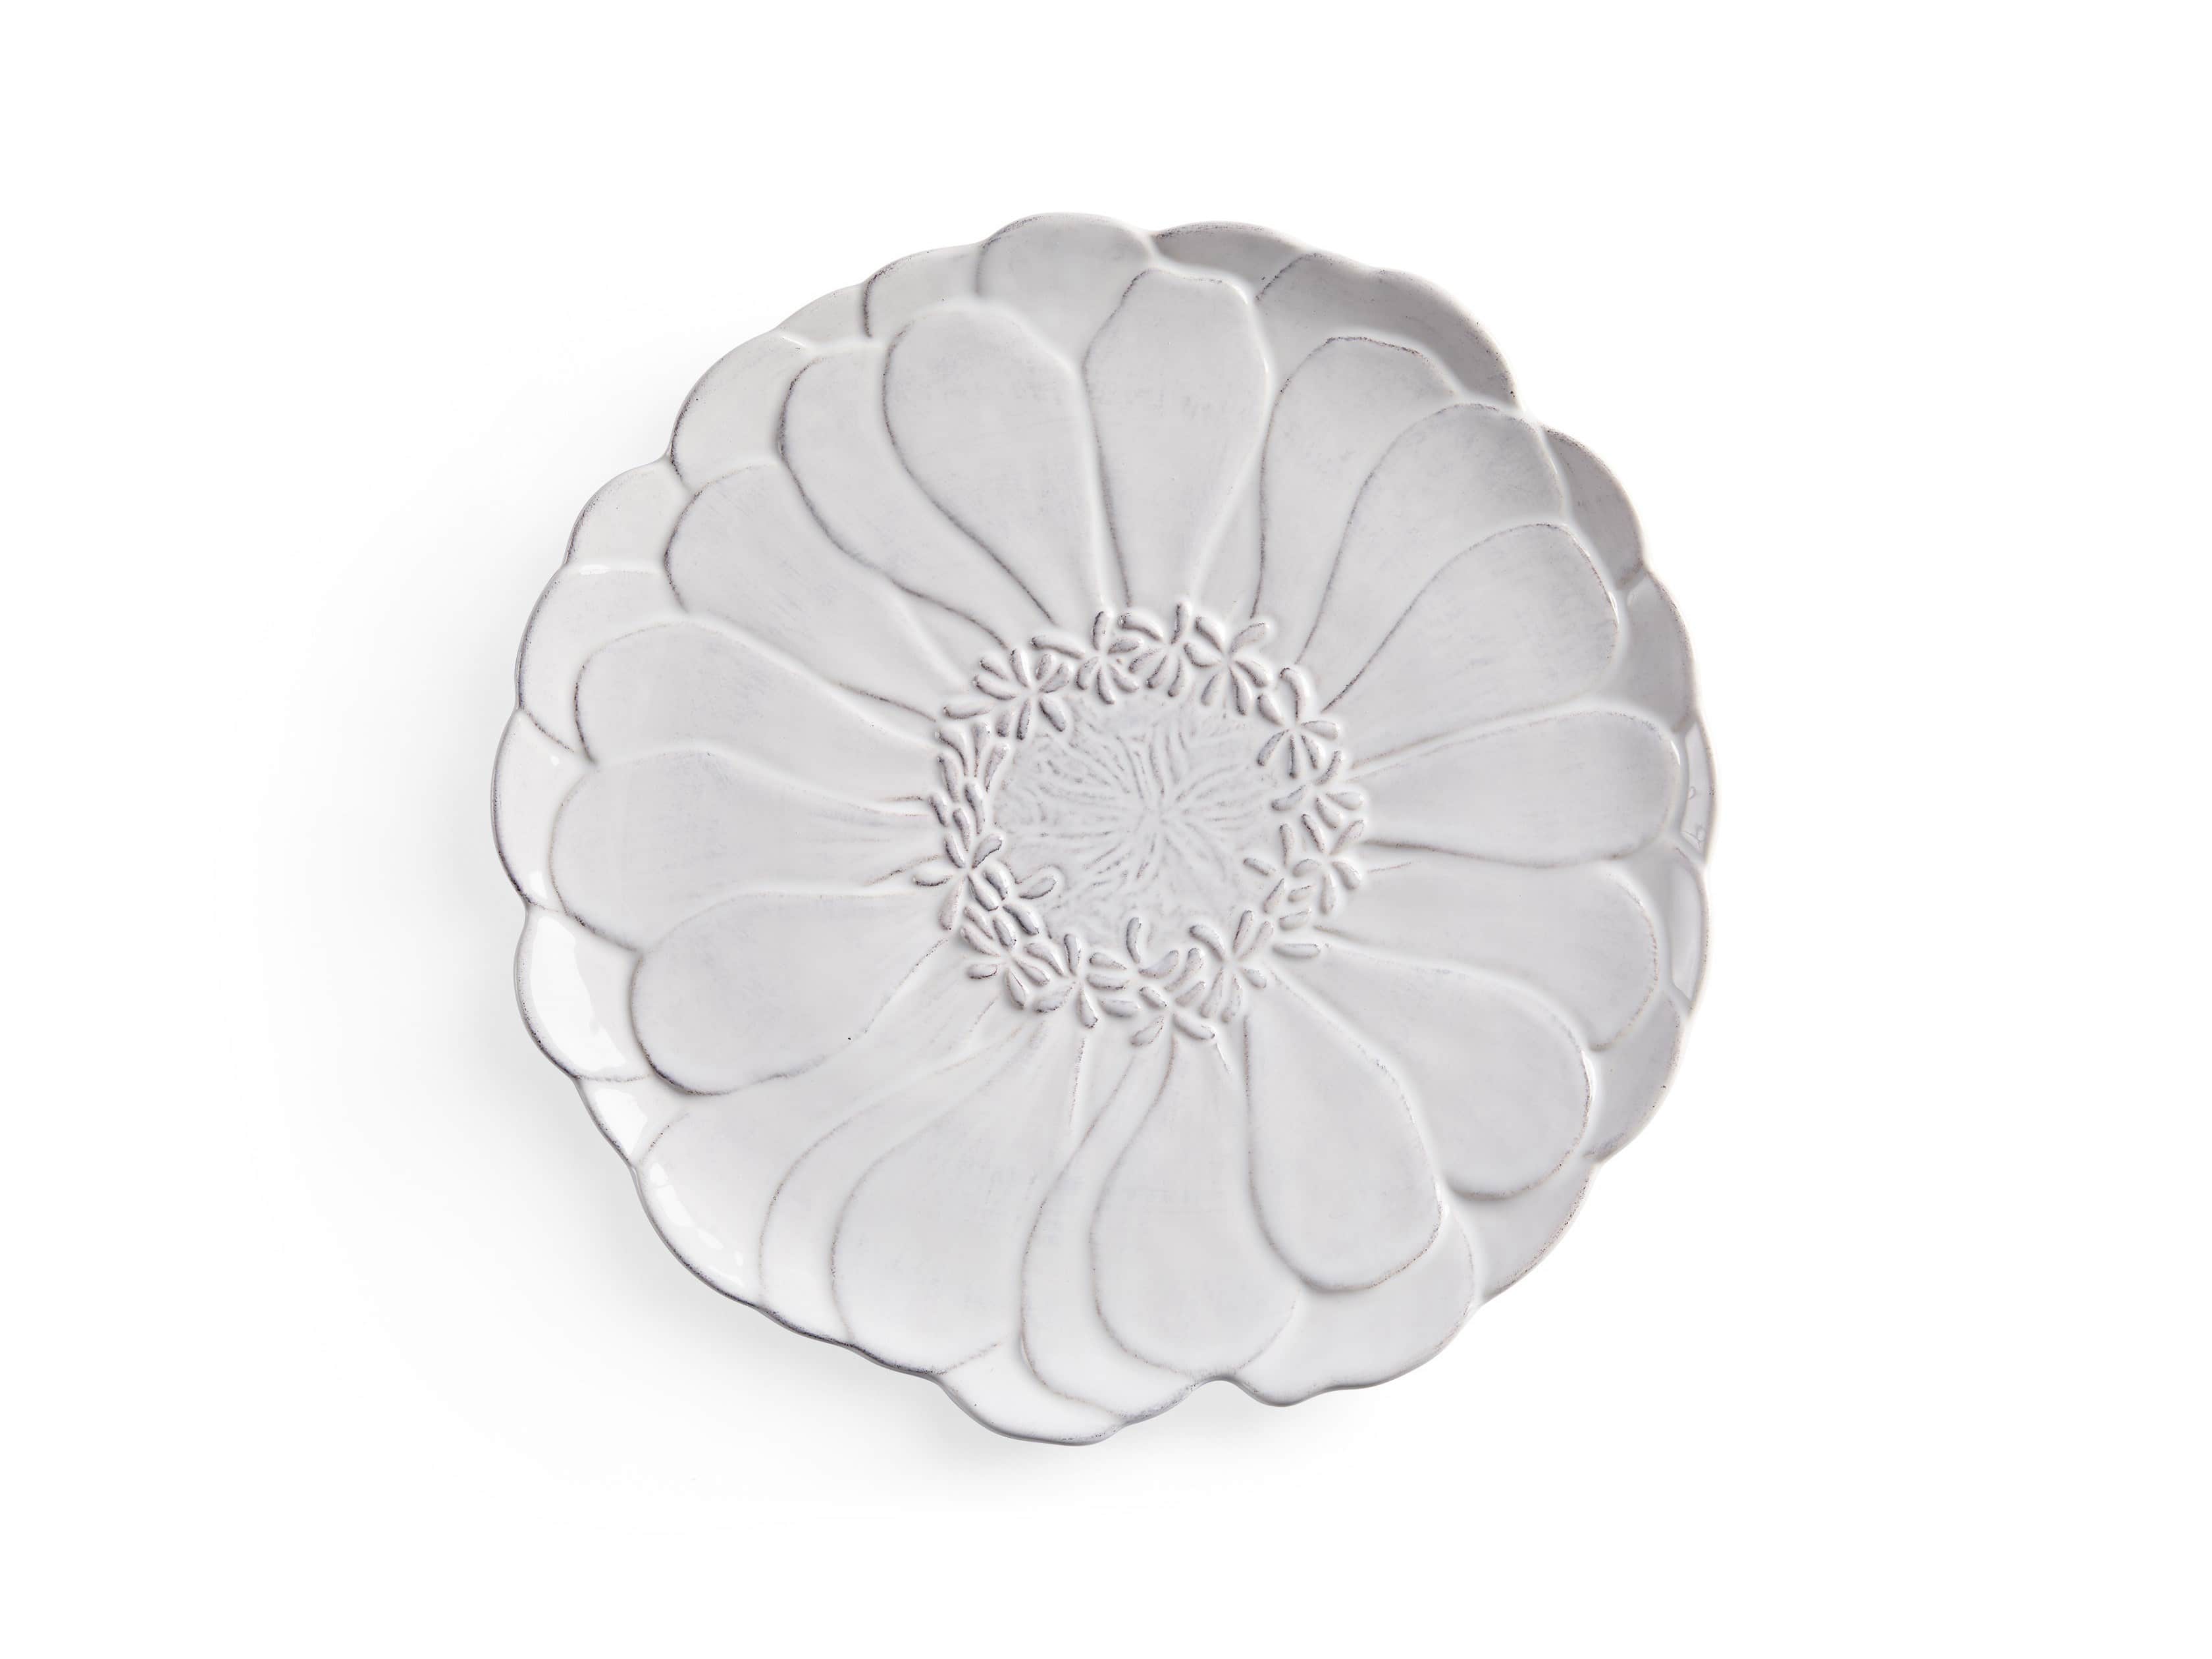 Bloom Medium Plate - Come take a peek at more Arhaus French Vintage Timeless Furniture, Decor and Lighting on Hello Lovely Studio.